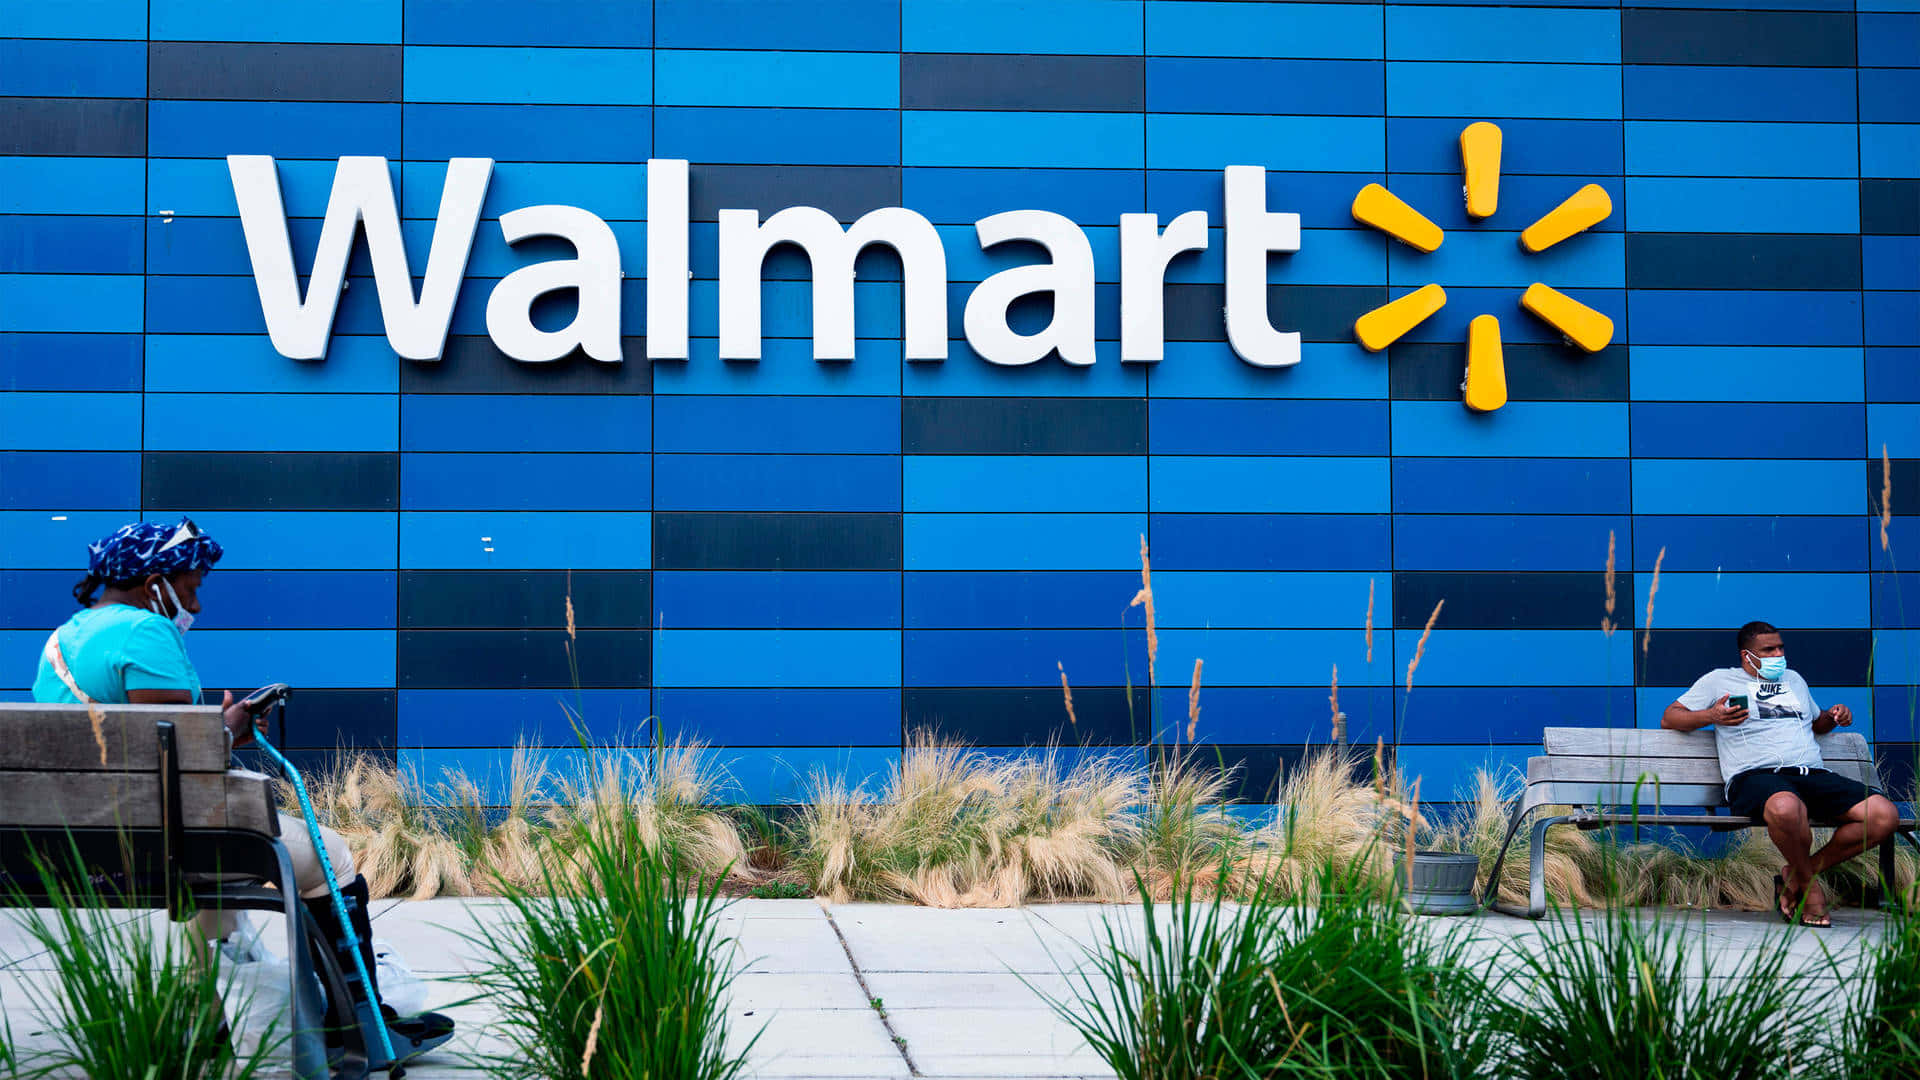 Walmart's New Logo Is Seen In The Background